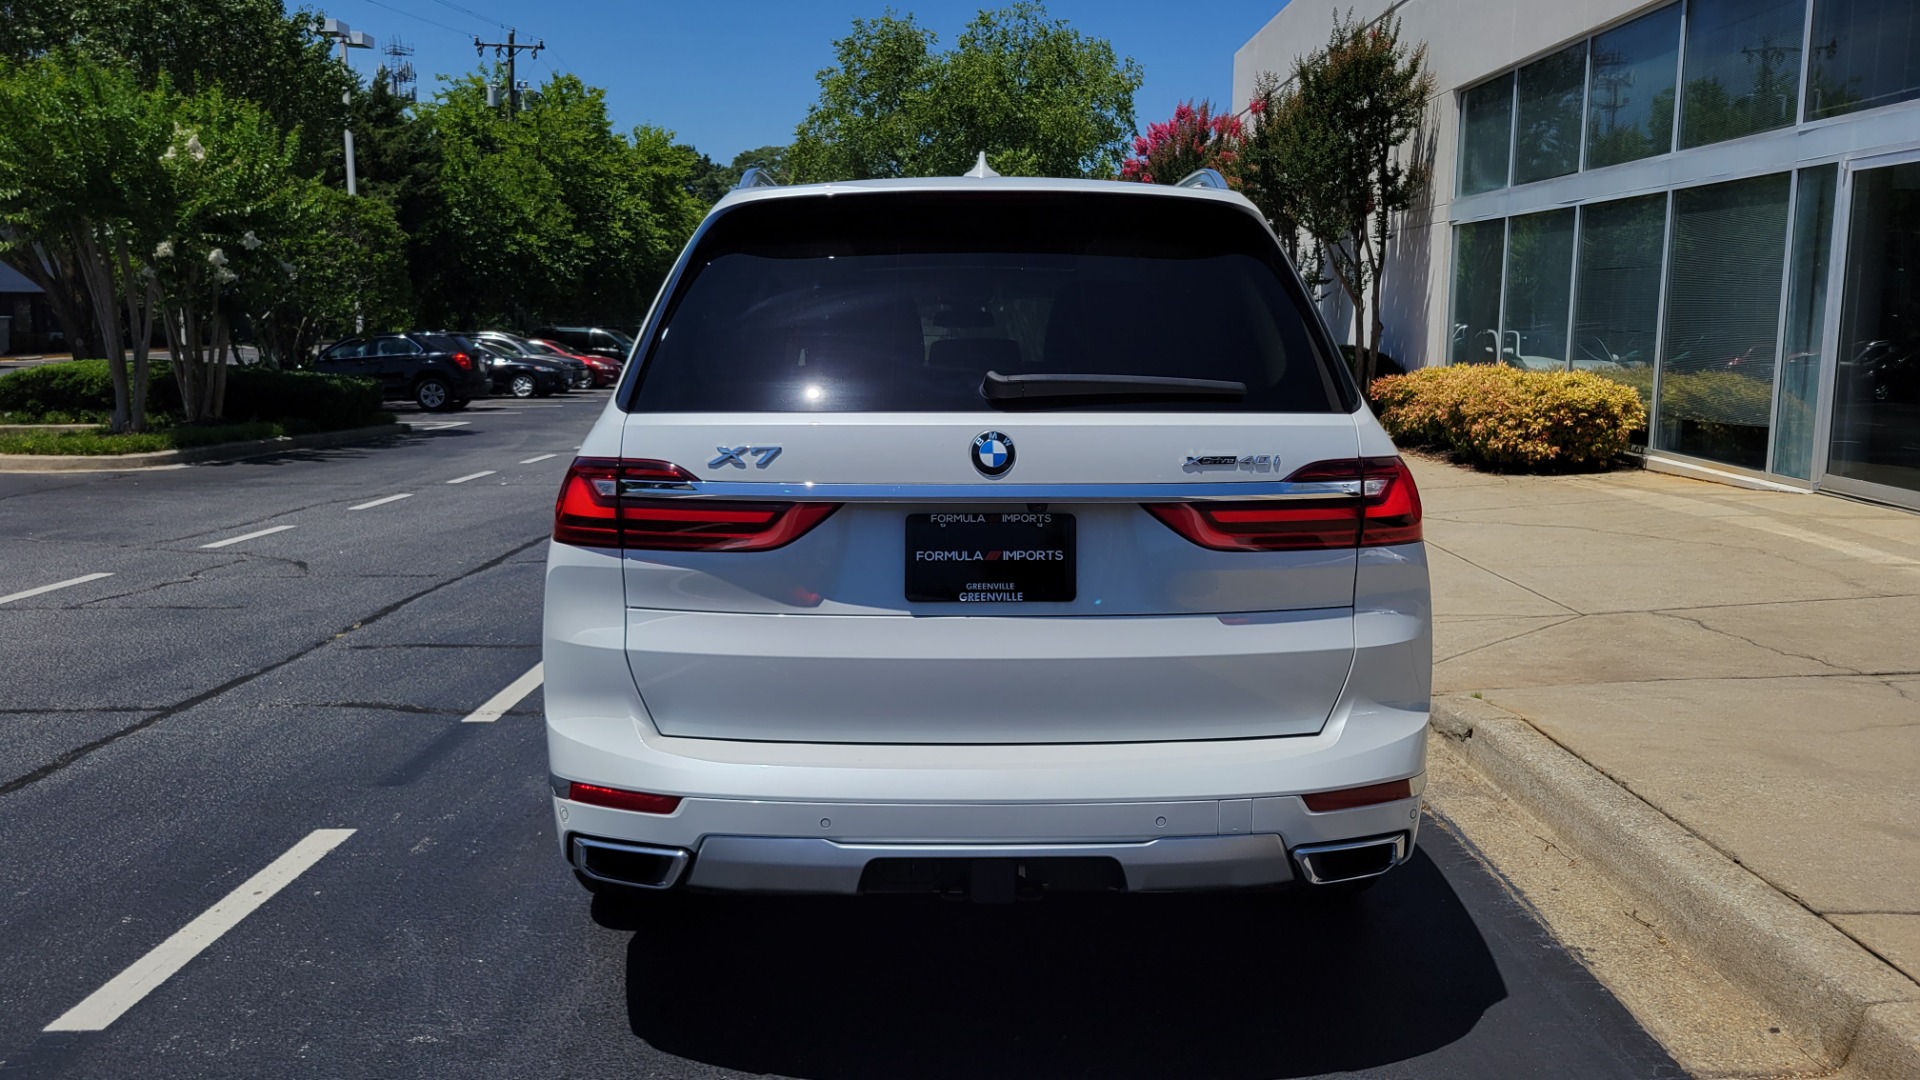 Used 2019 BMW X7 XDRIVE40I PREMIUM / NAV / HUD / PARK ASST PLUS / REMOTE START / 3D VIEW for sale $62,995 at Formula Imports in Charlotte NC 28227 9